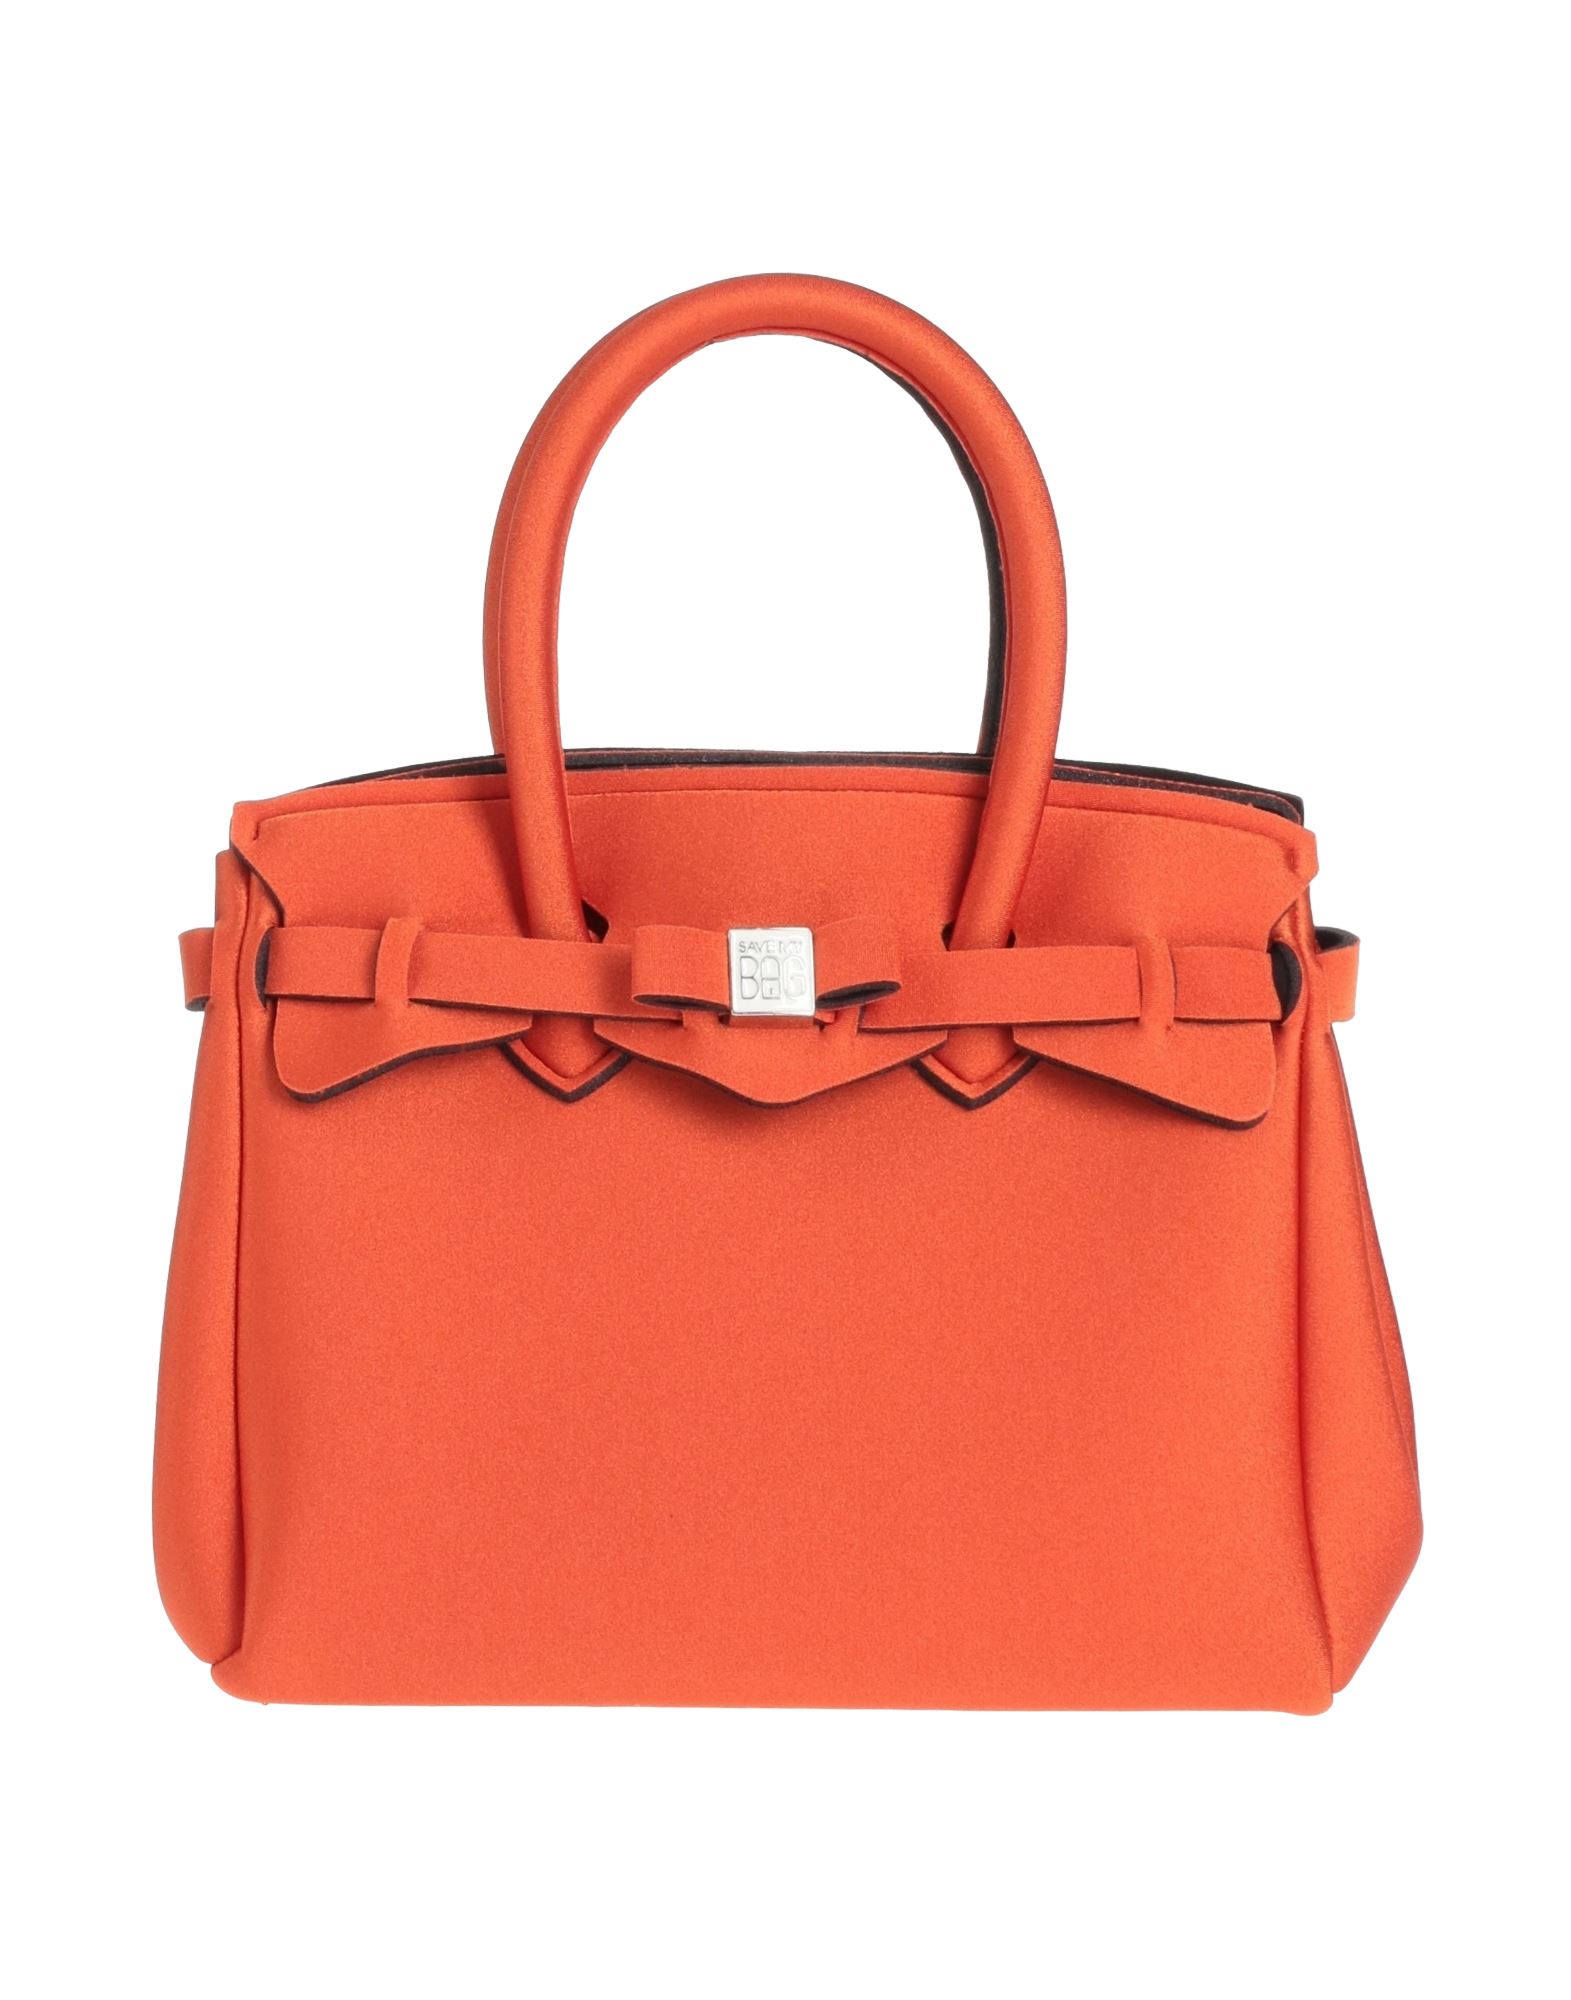 Save My Bag Handbags In Red